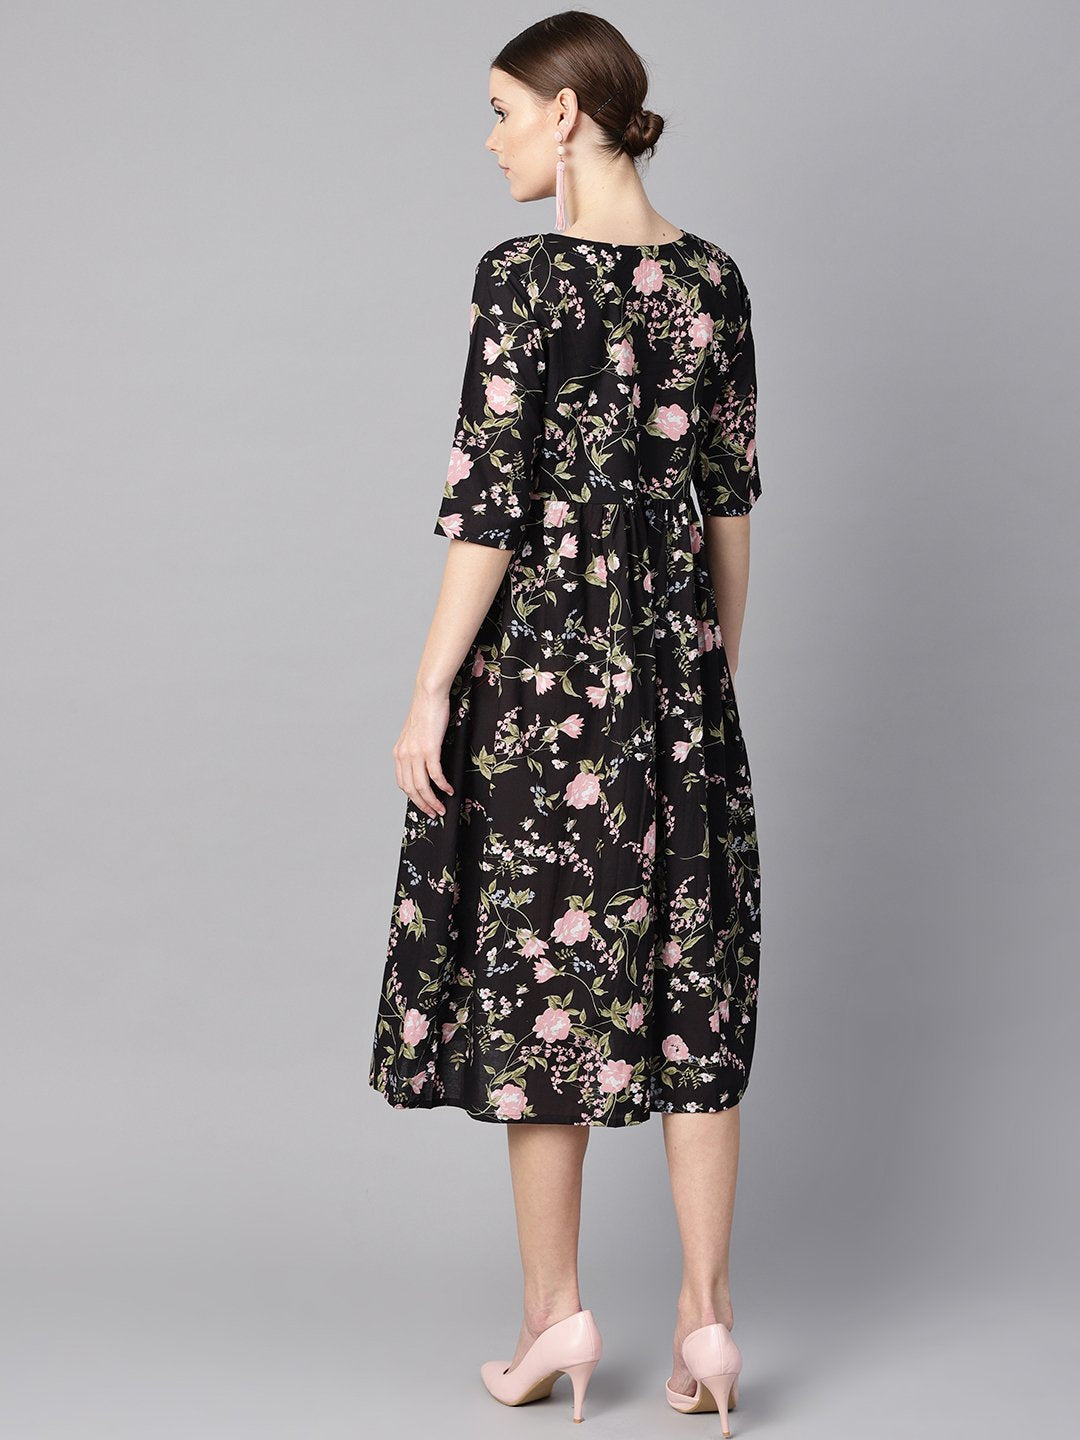 Women's Black Floral Dress With Round Neck & Half Sleeves - Nayo Clothing